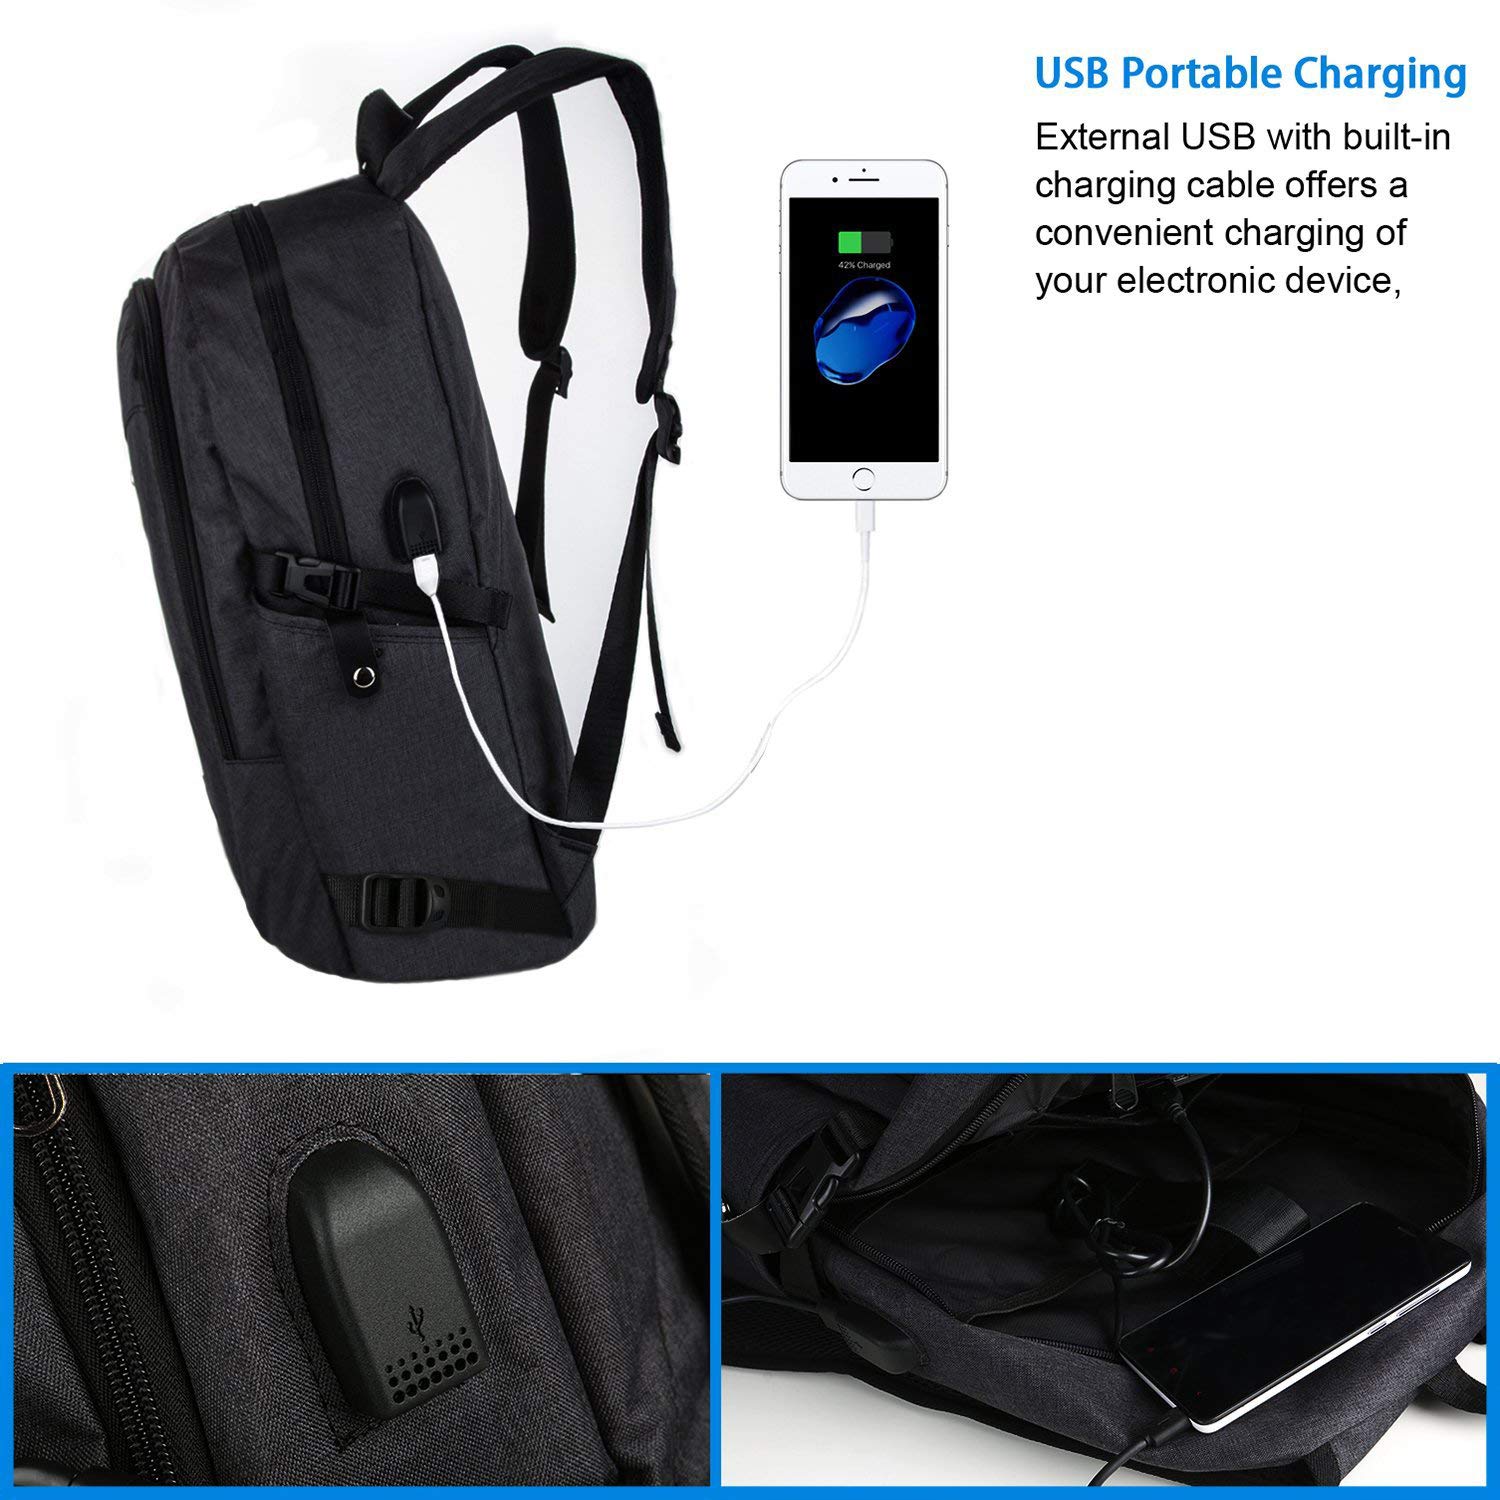 Anti Theft Business Laptop Backpack with USB Charging Port Fits 15.6 inch Laptop, Slim Travel College Bookbag for MacBook Computer, School Computer Bag for Women & Men by Mancro (Black) - image 2 of 7